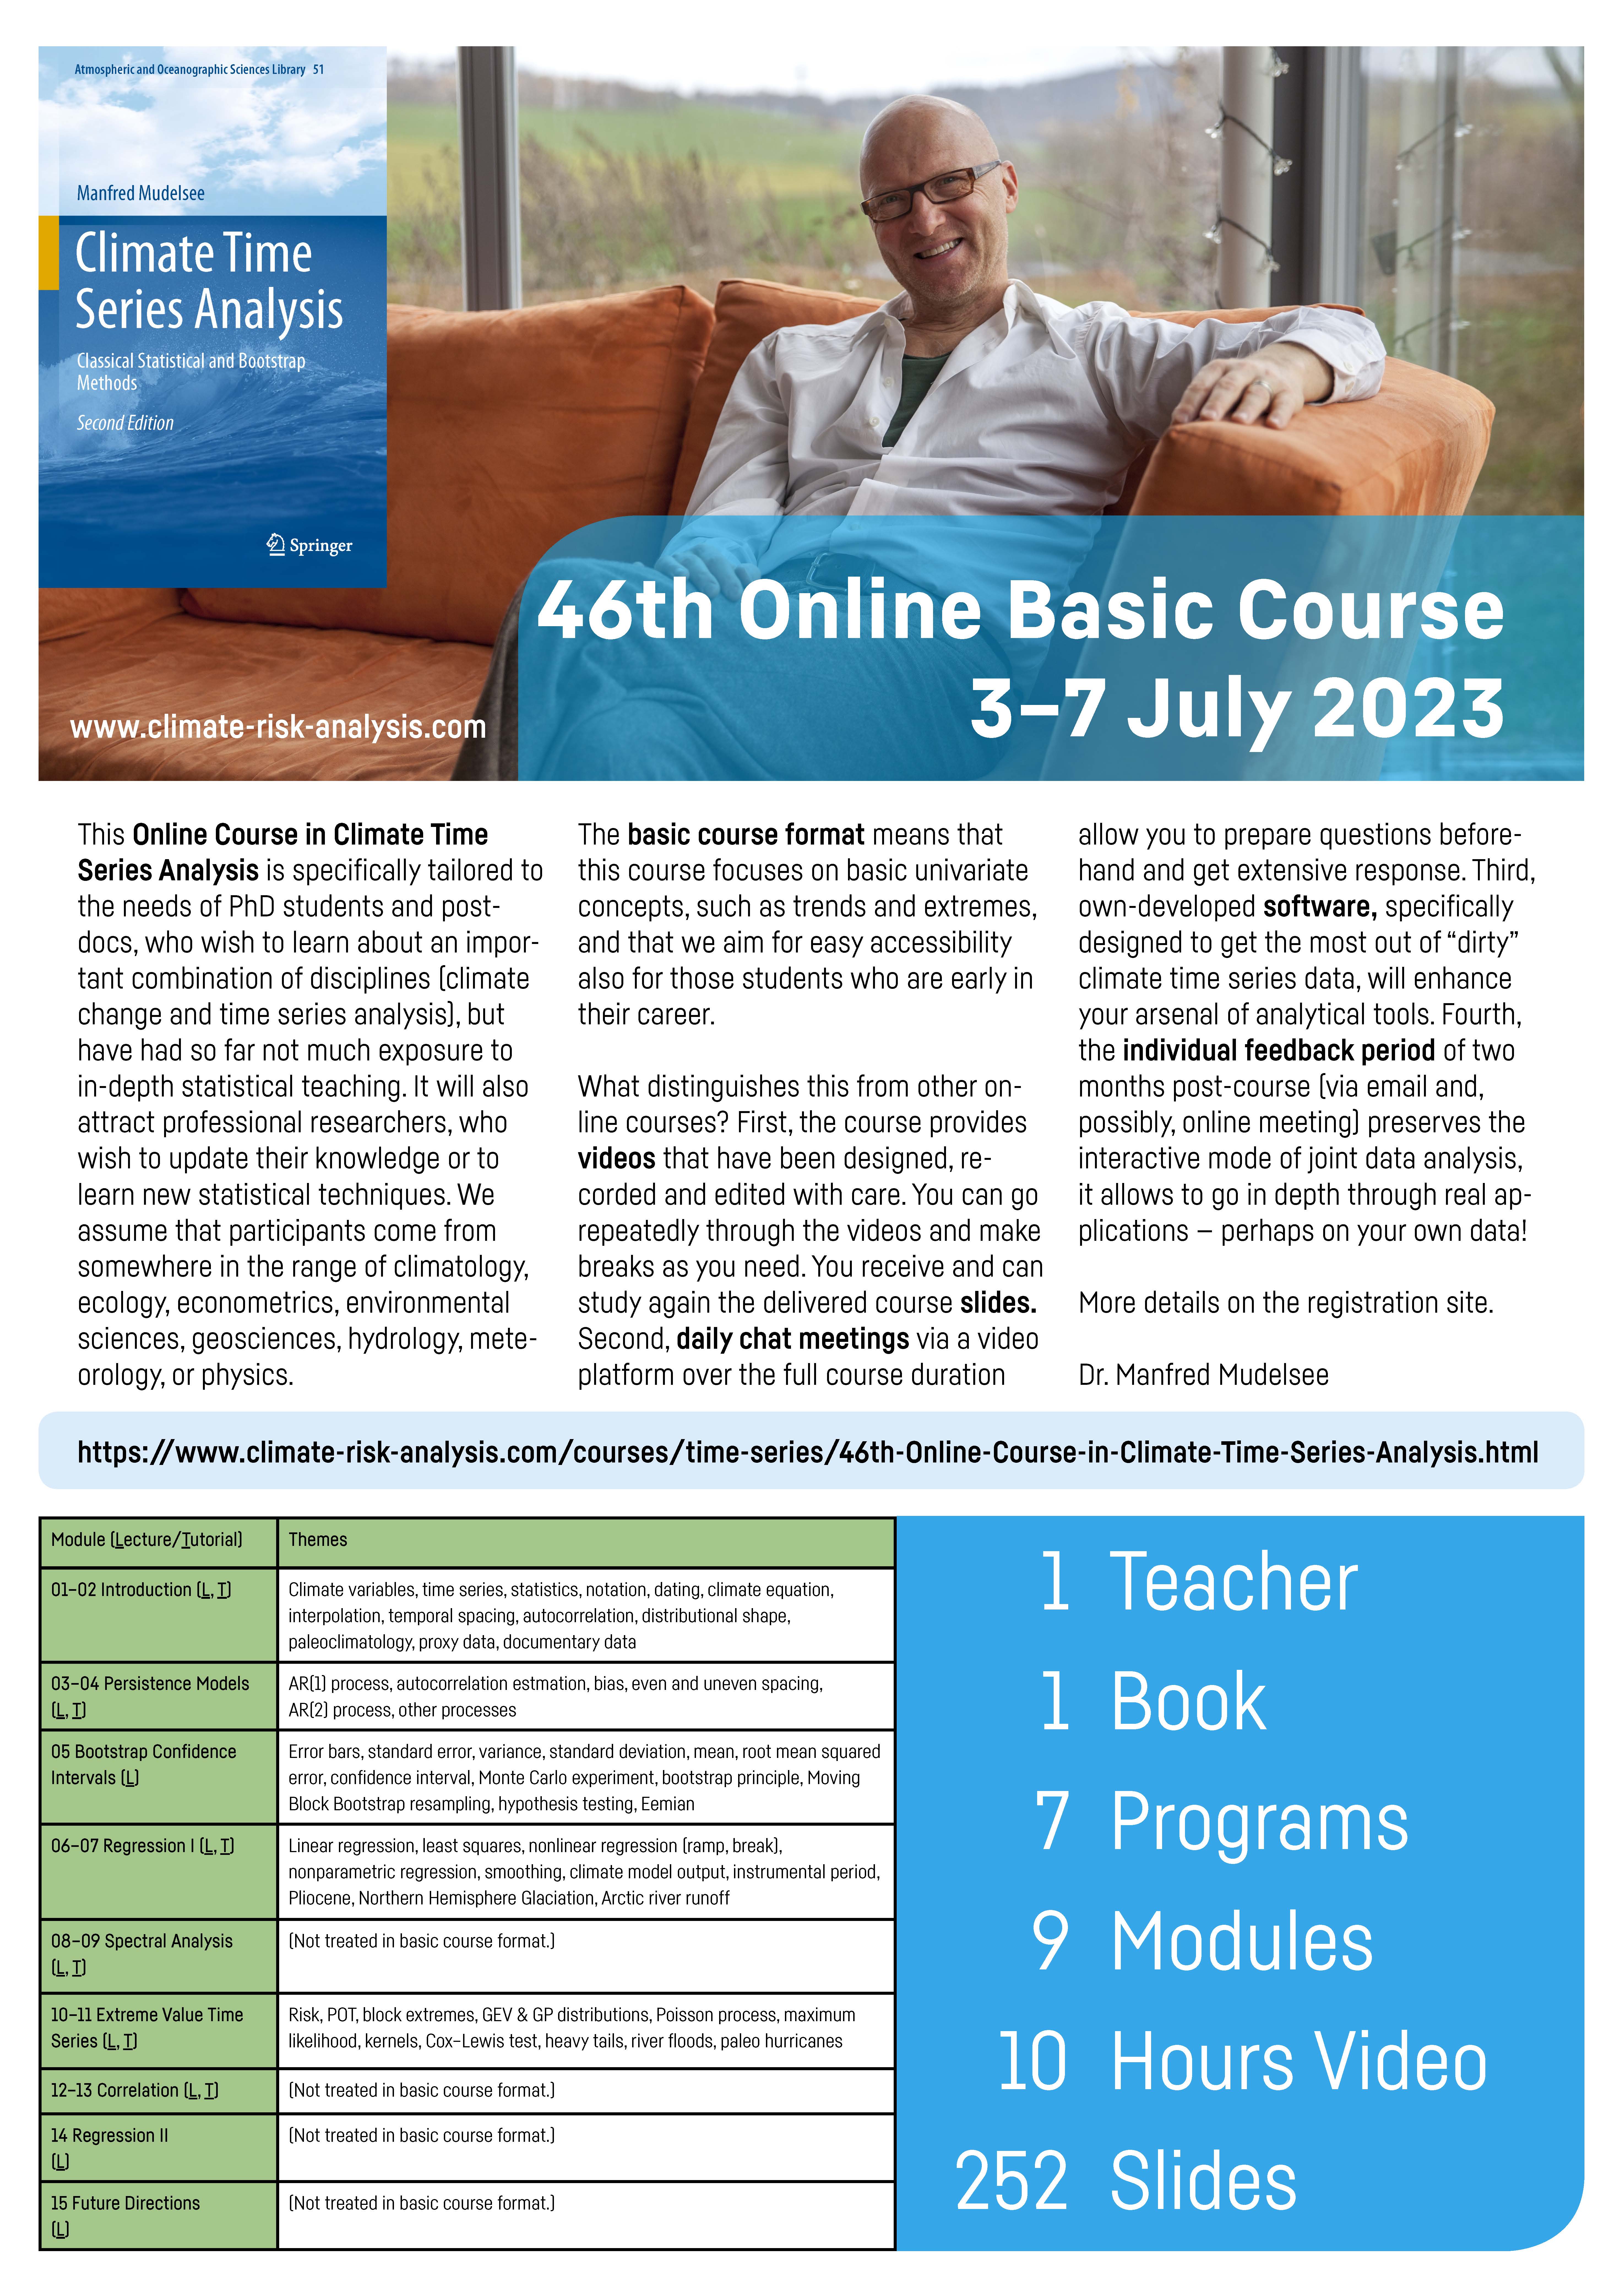 Flyer - 46th Basic Online course in Climate Time Series Analysis